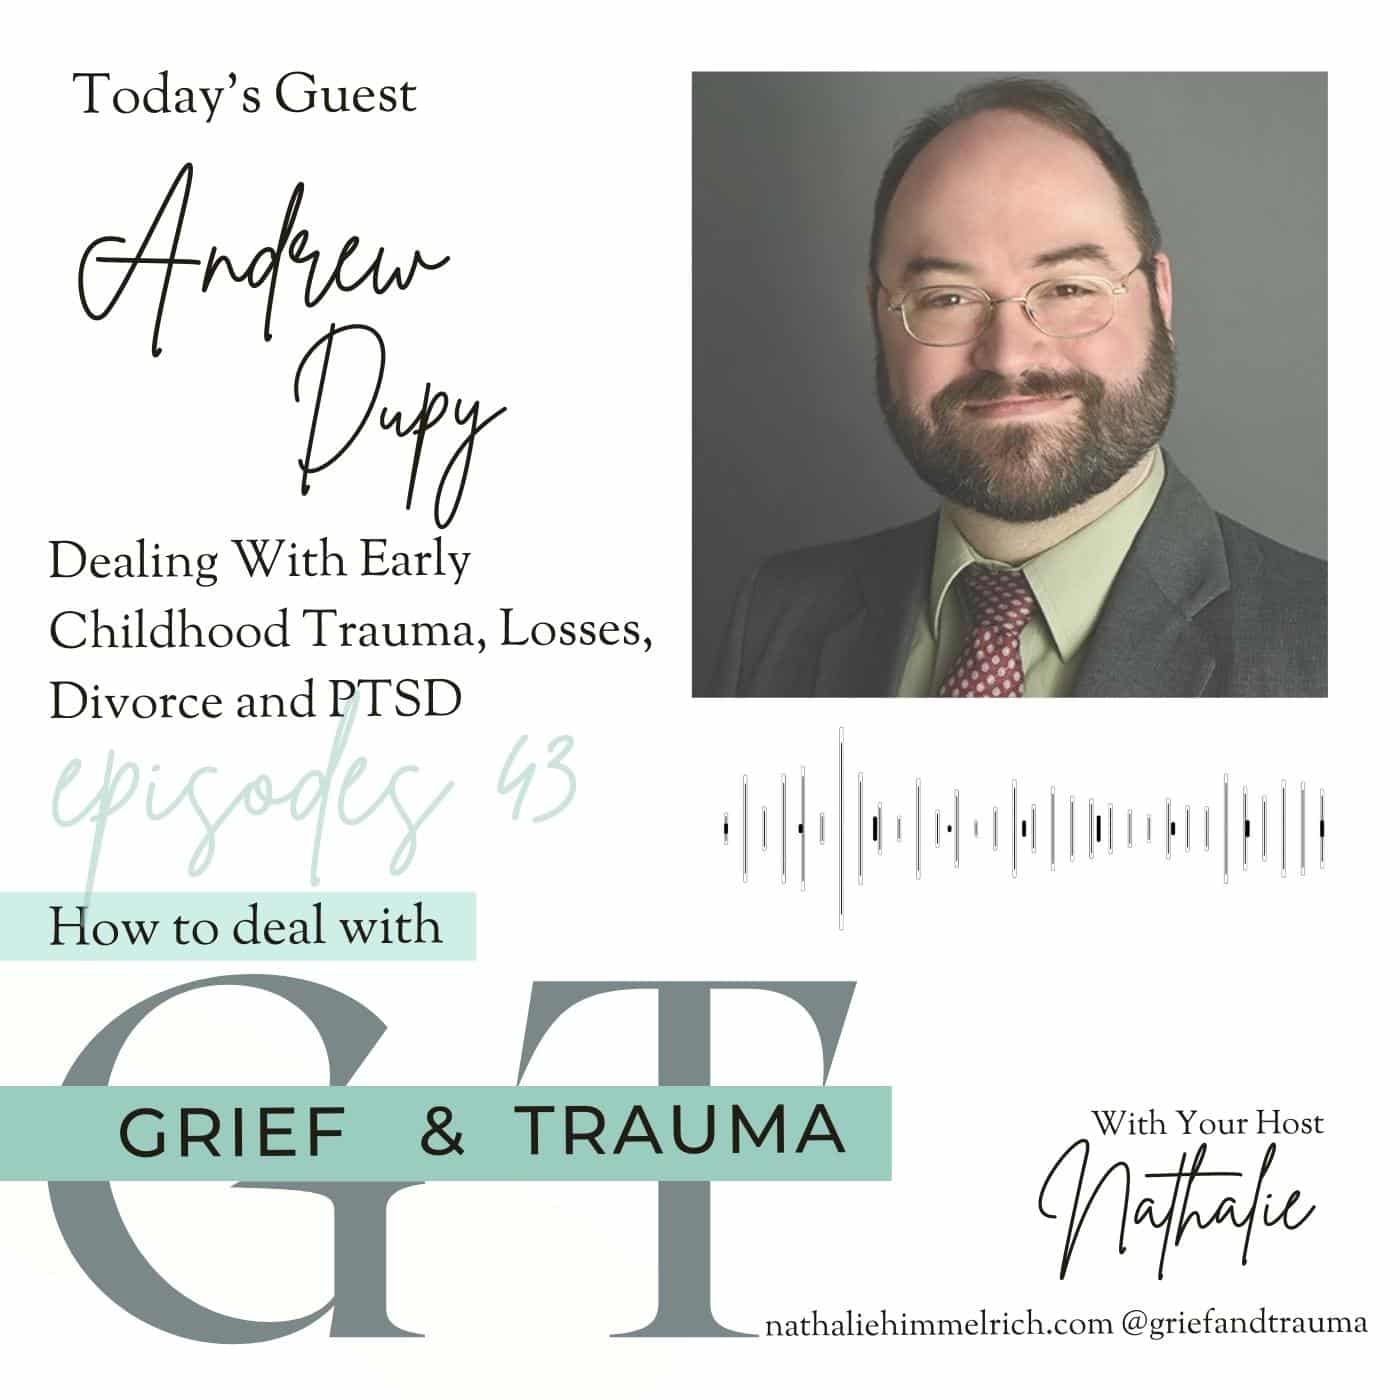 Andrew Dupy on Dealing With Early Childhood Trauma, Losses, Divorce, and PTSD | Episode 43